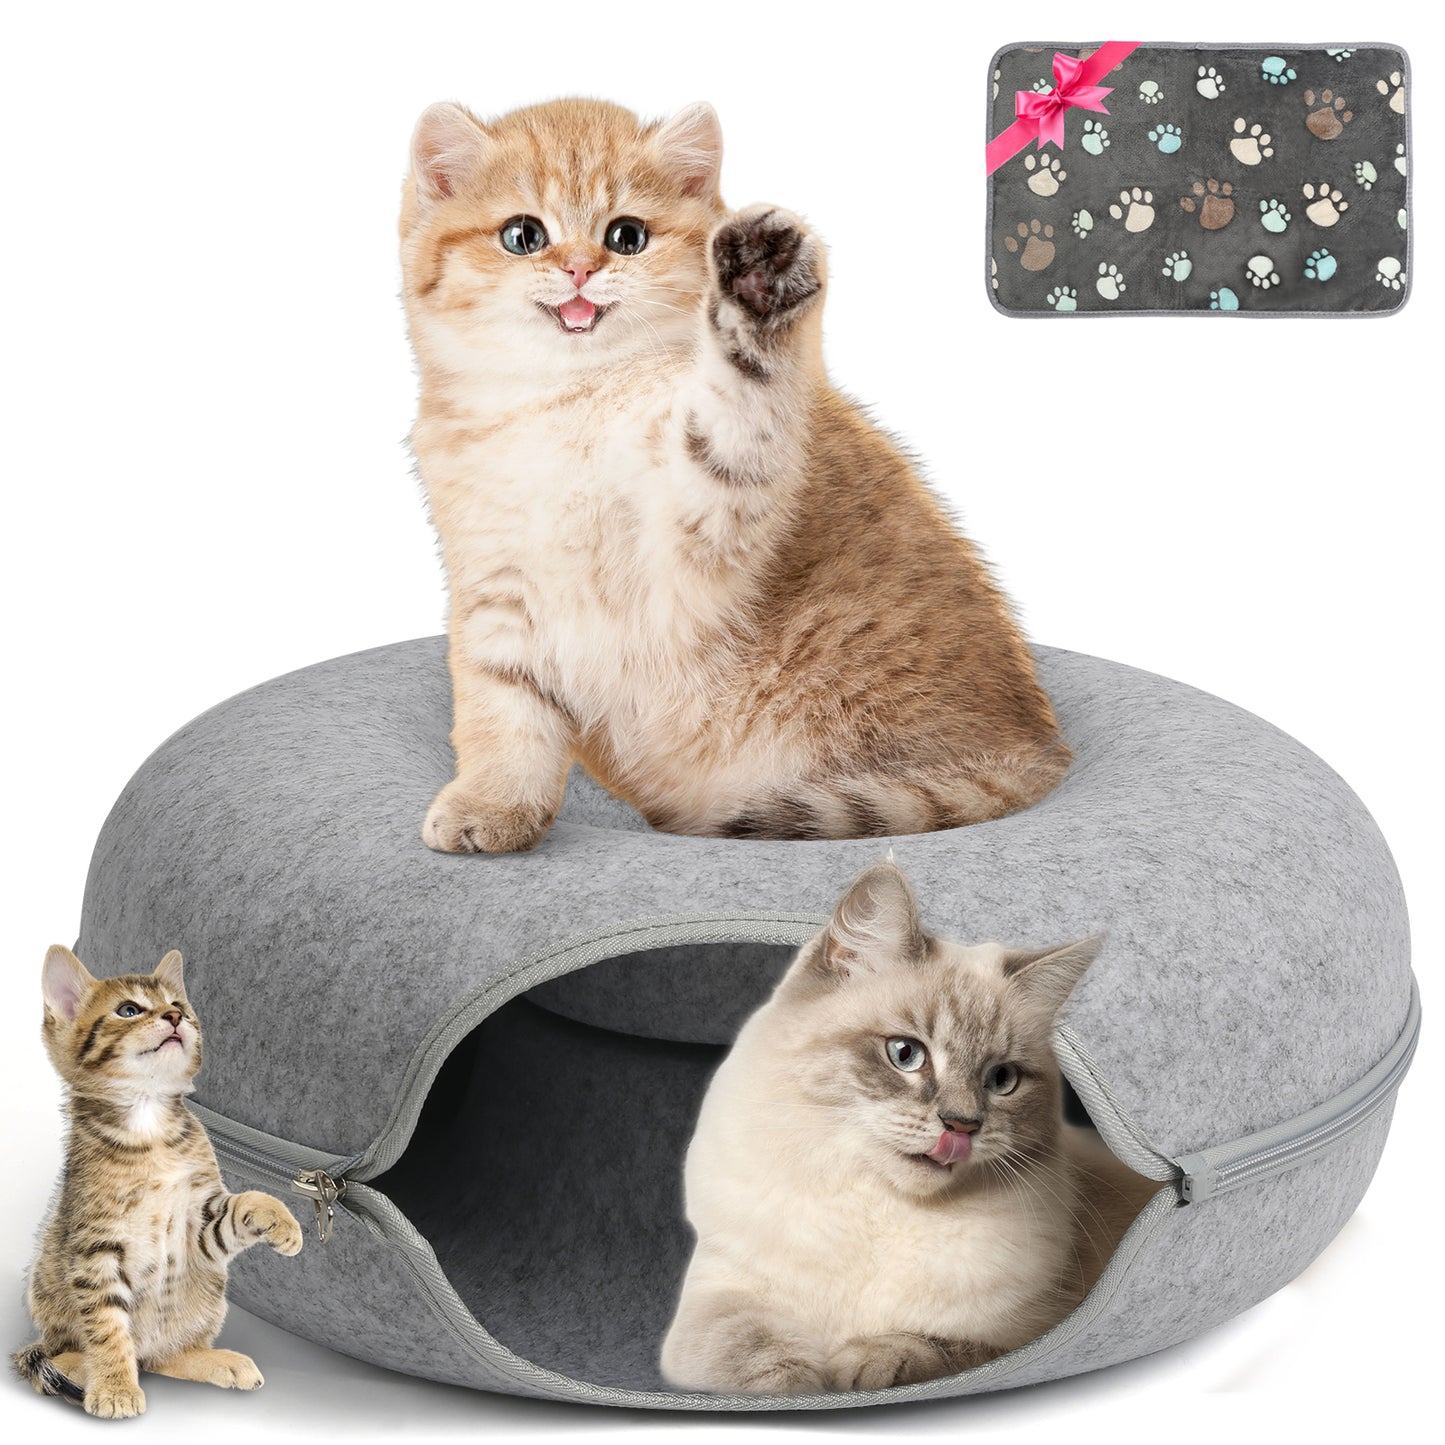 AOSION Peekaboo Cat Cave,Cat Donut Bed With Pet Blanket